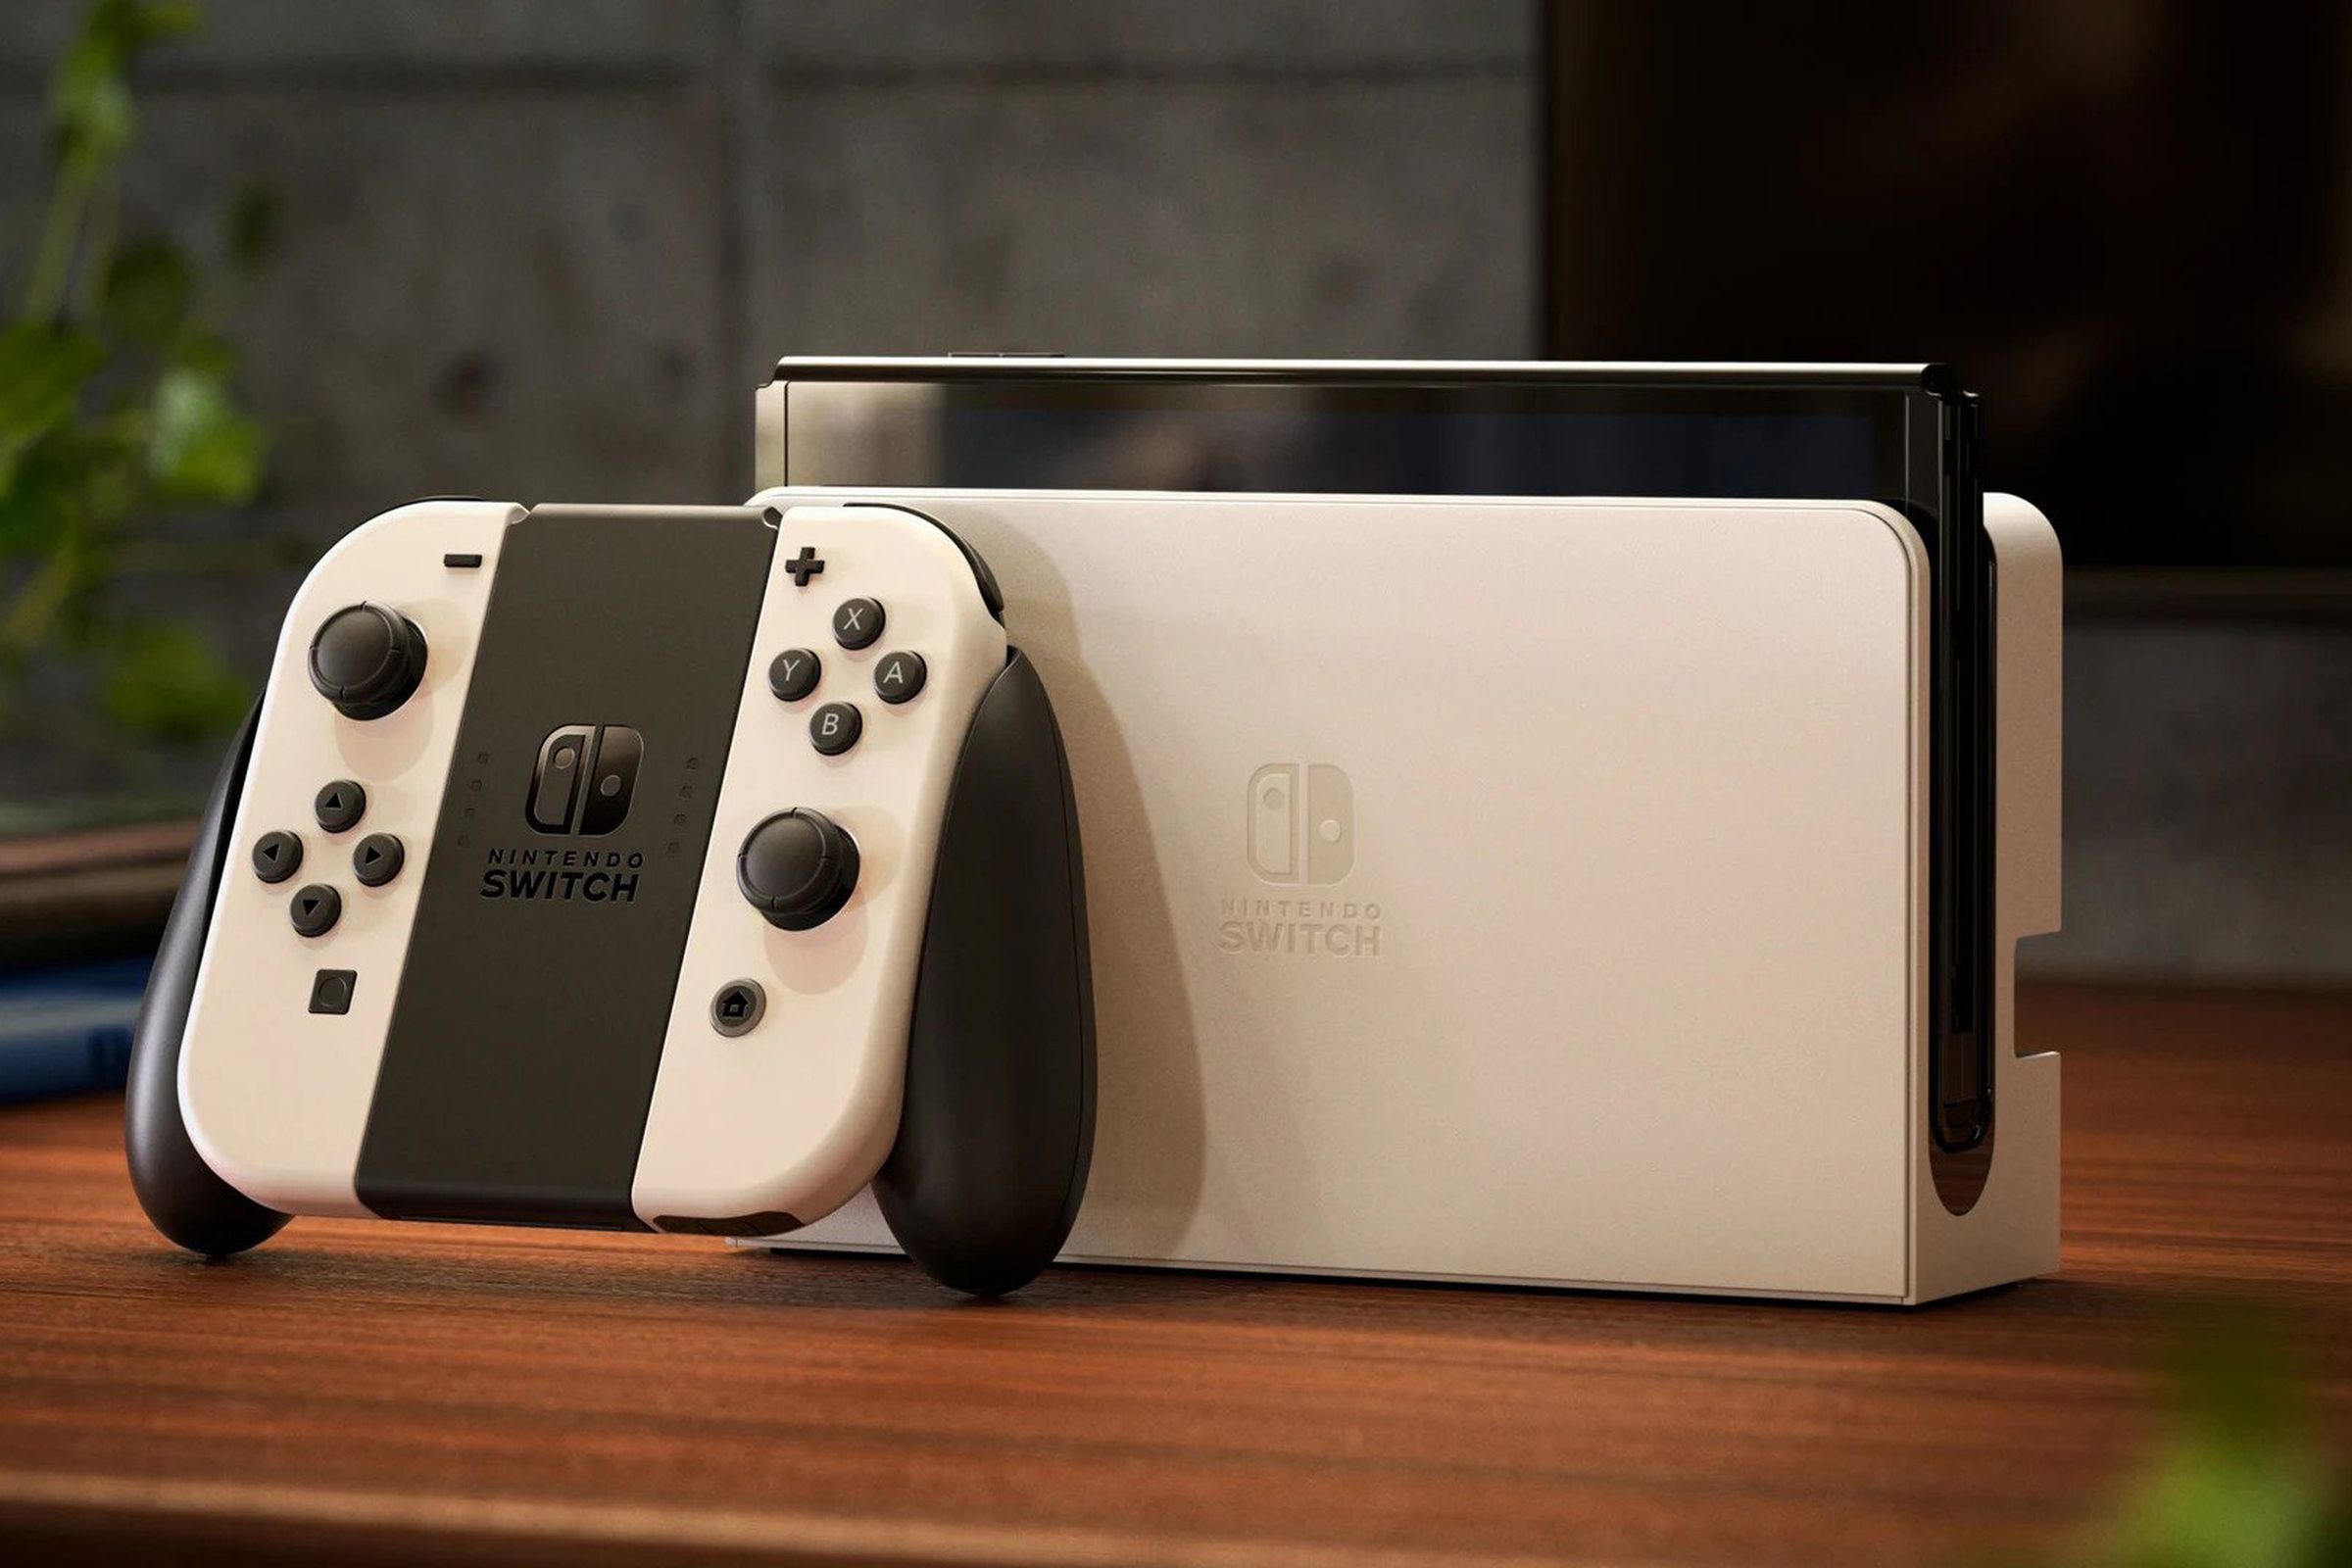 The Nintendo Switch OLED model boasts a vibrant, 7-inch display and a slate of minor upgrades.